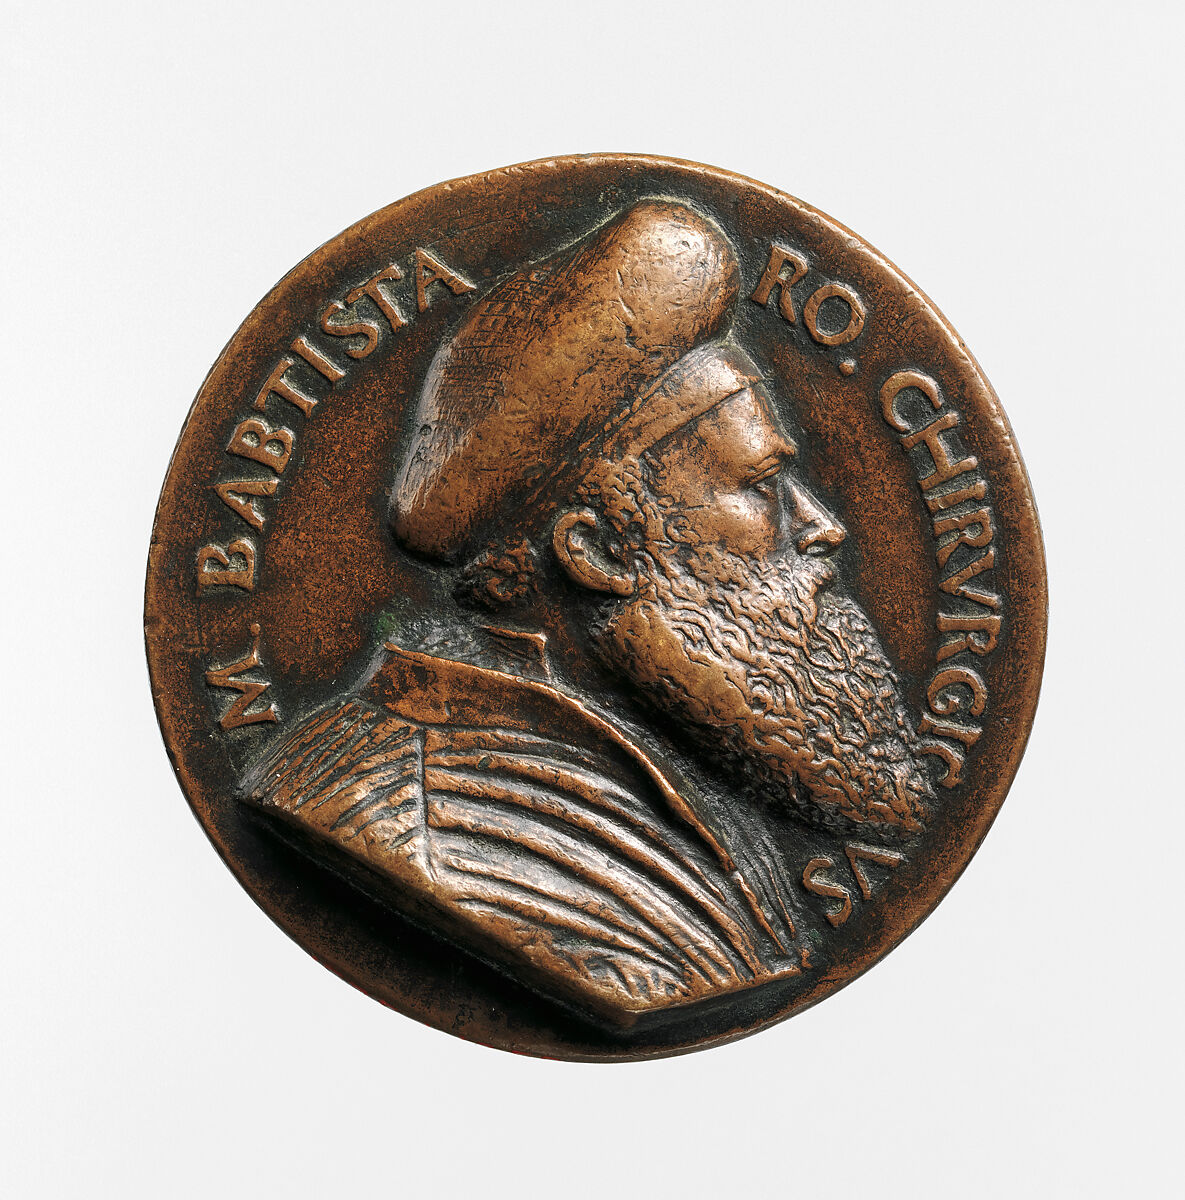 Portrait medal of Battista Vigo da Rapallo or Baptista Romanus (obverse); a Hand Holding a Branch and a Surgical Instrument, Bronze (copper alloy with light brown
patina and remnants of black wax or lacquer)., Italian, Venice or Padua (?) 